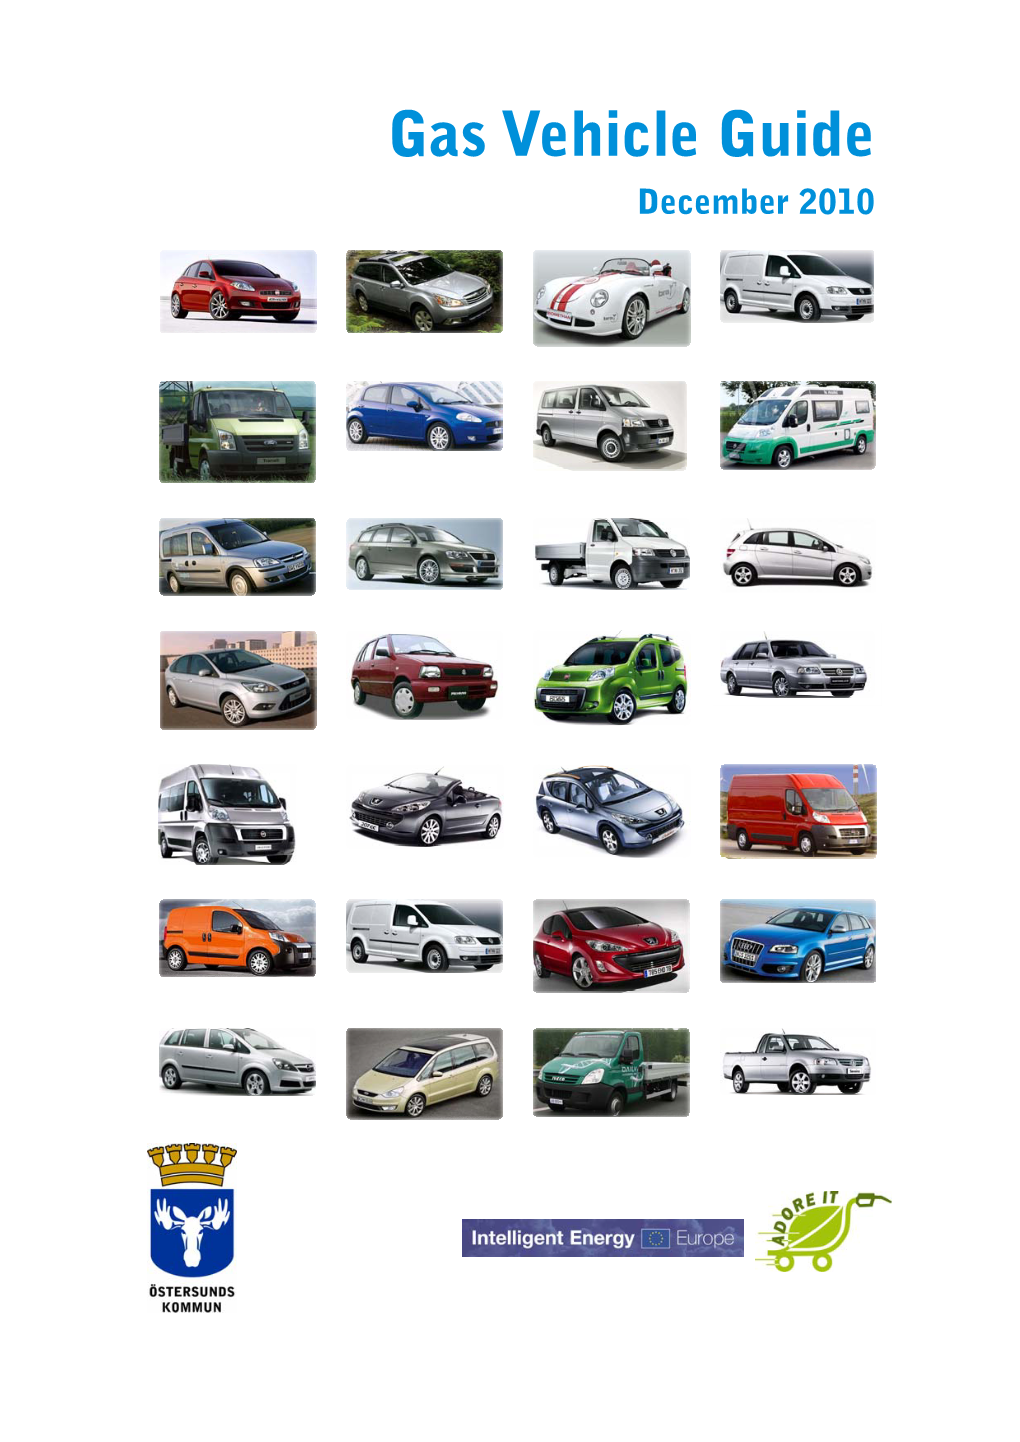 Gas Vehicle Guide December 2010